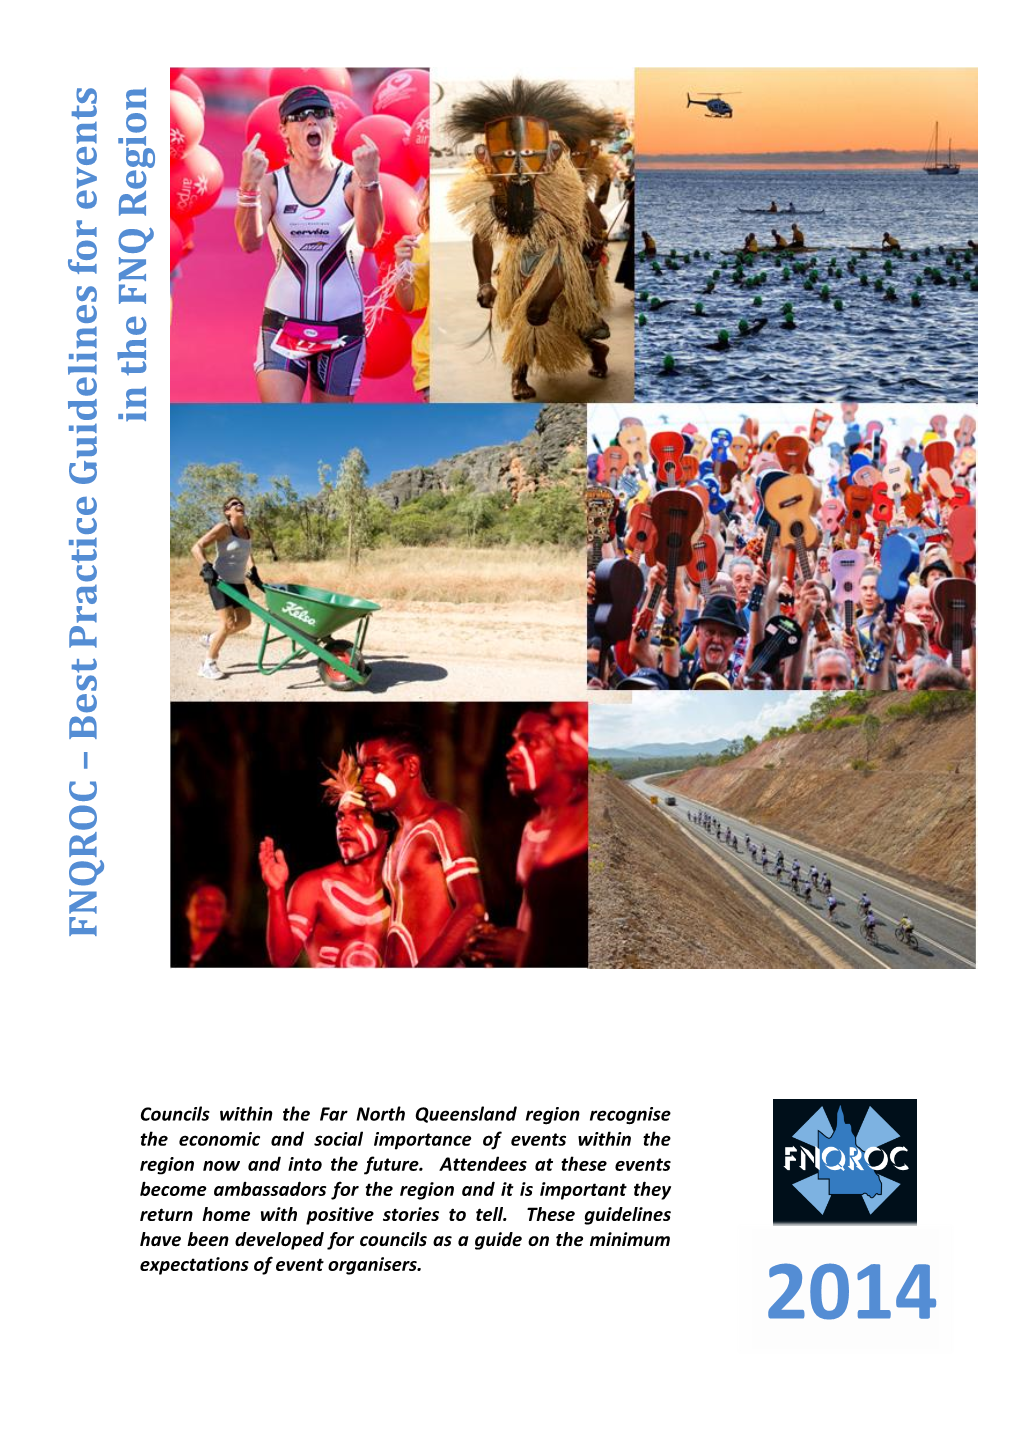 FNQROC – Best Practice Guidelines for Events in the FNQ Region